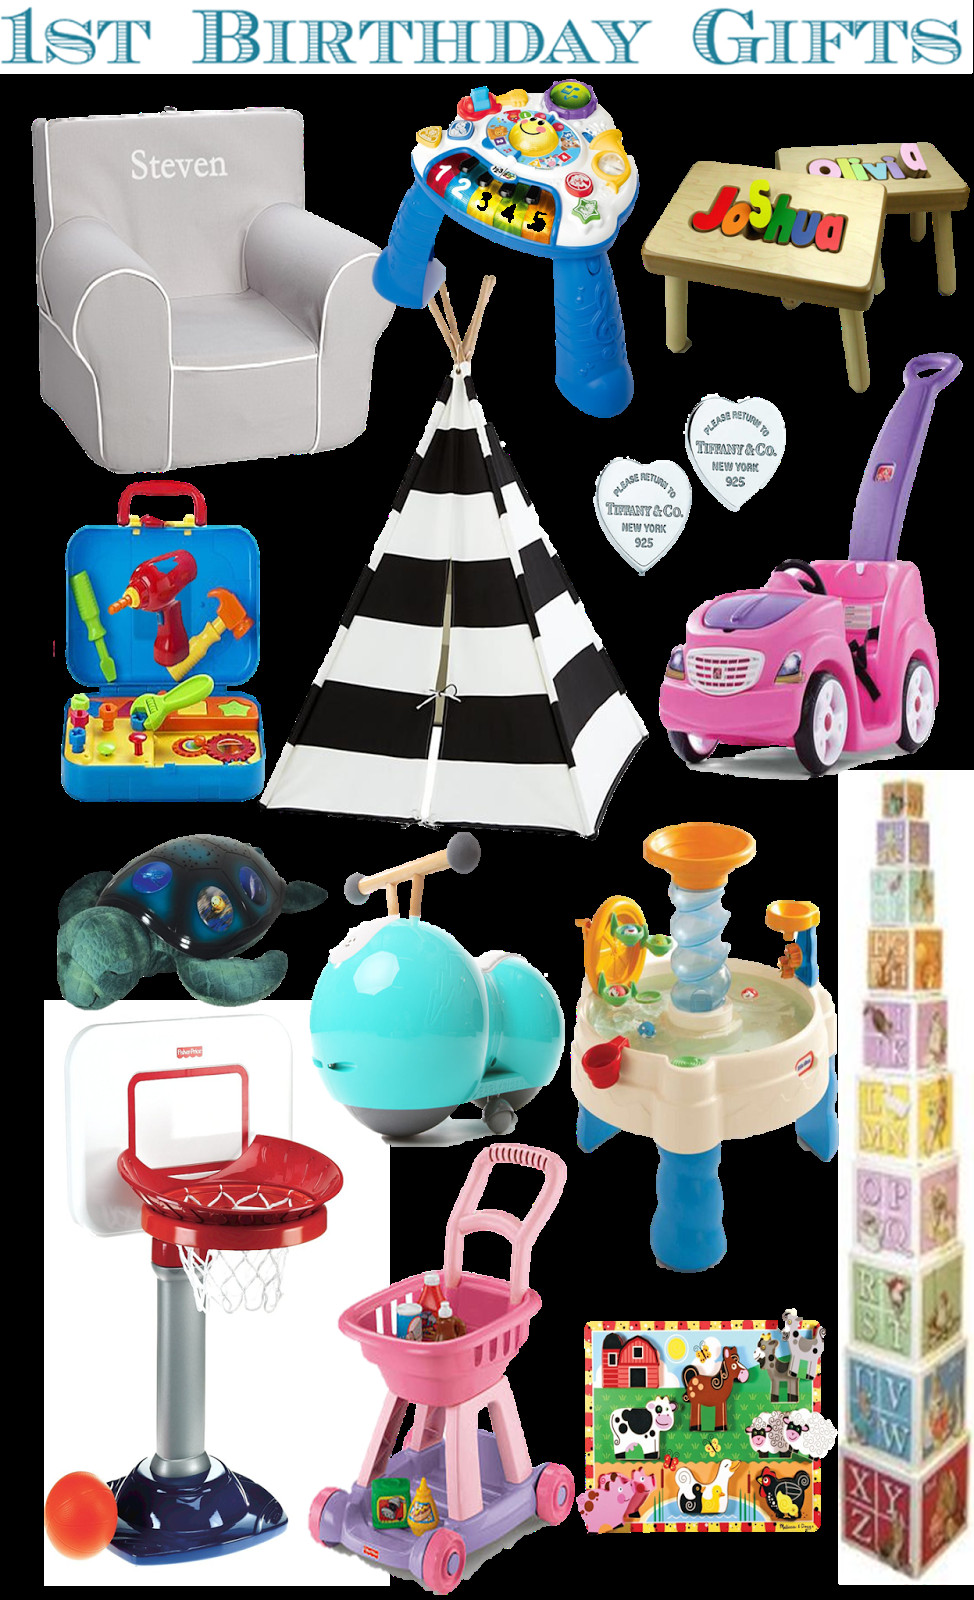 1St Birthday Gift Ideas
 rnlMusings Gift Guide 1st Birthday Gifts